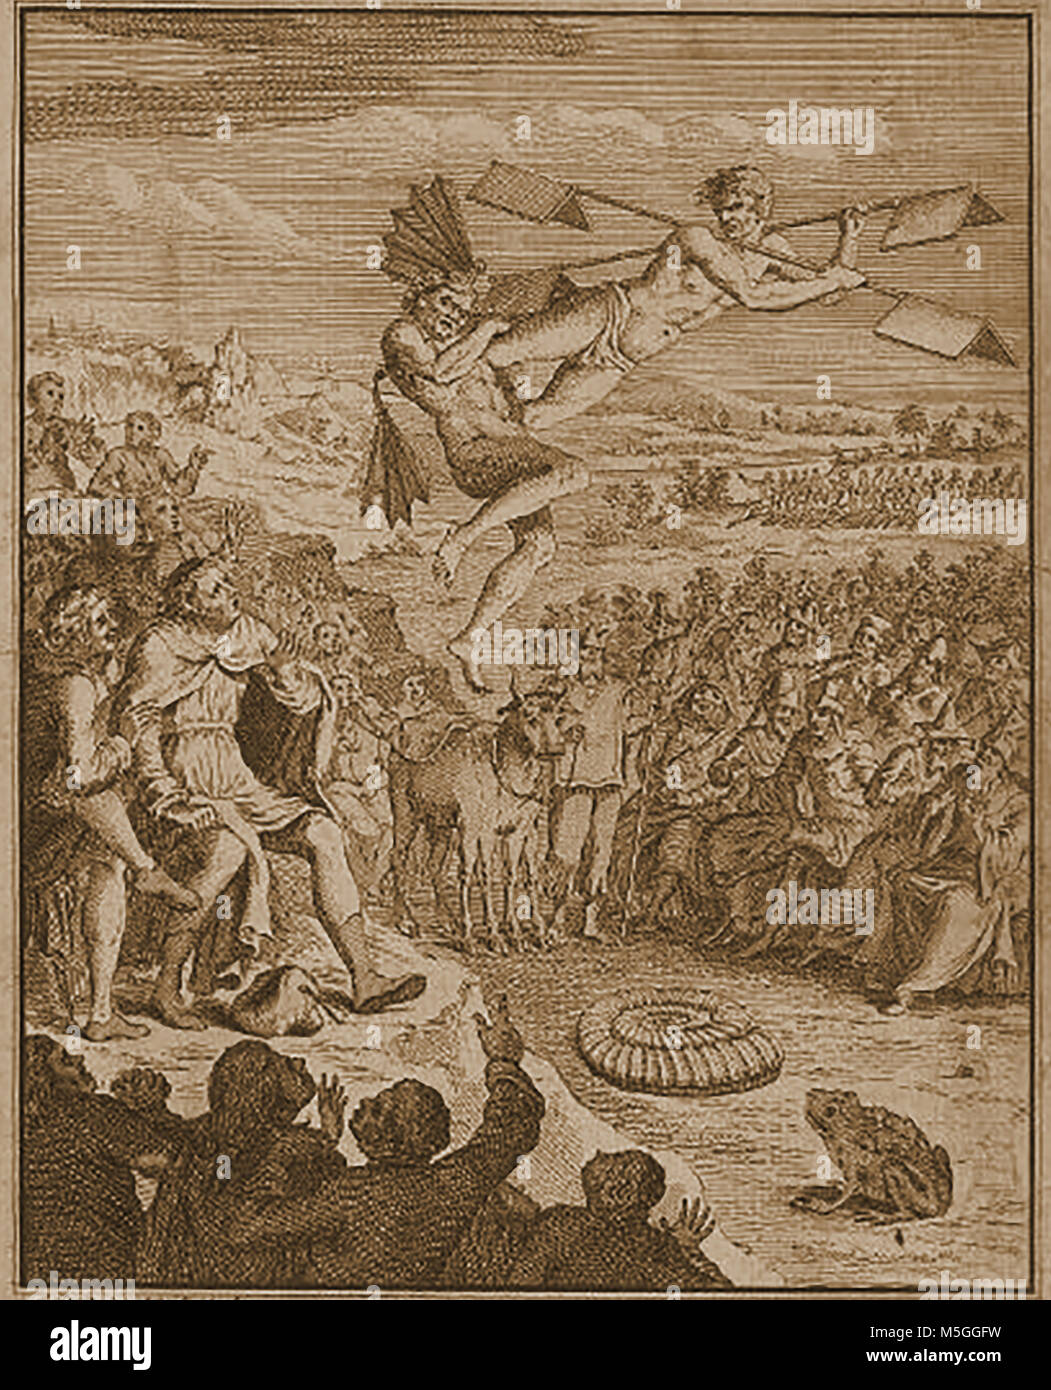 Historic aeronautics, balloons and flying machines - An artist's impression of a Flying Machine 1751 Stock Photo